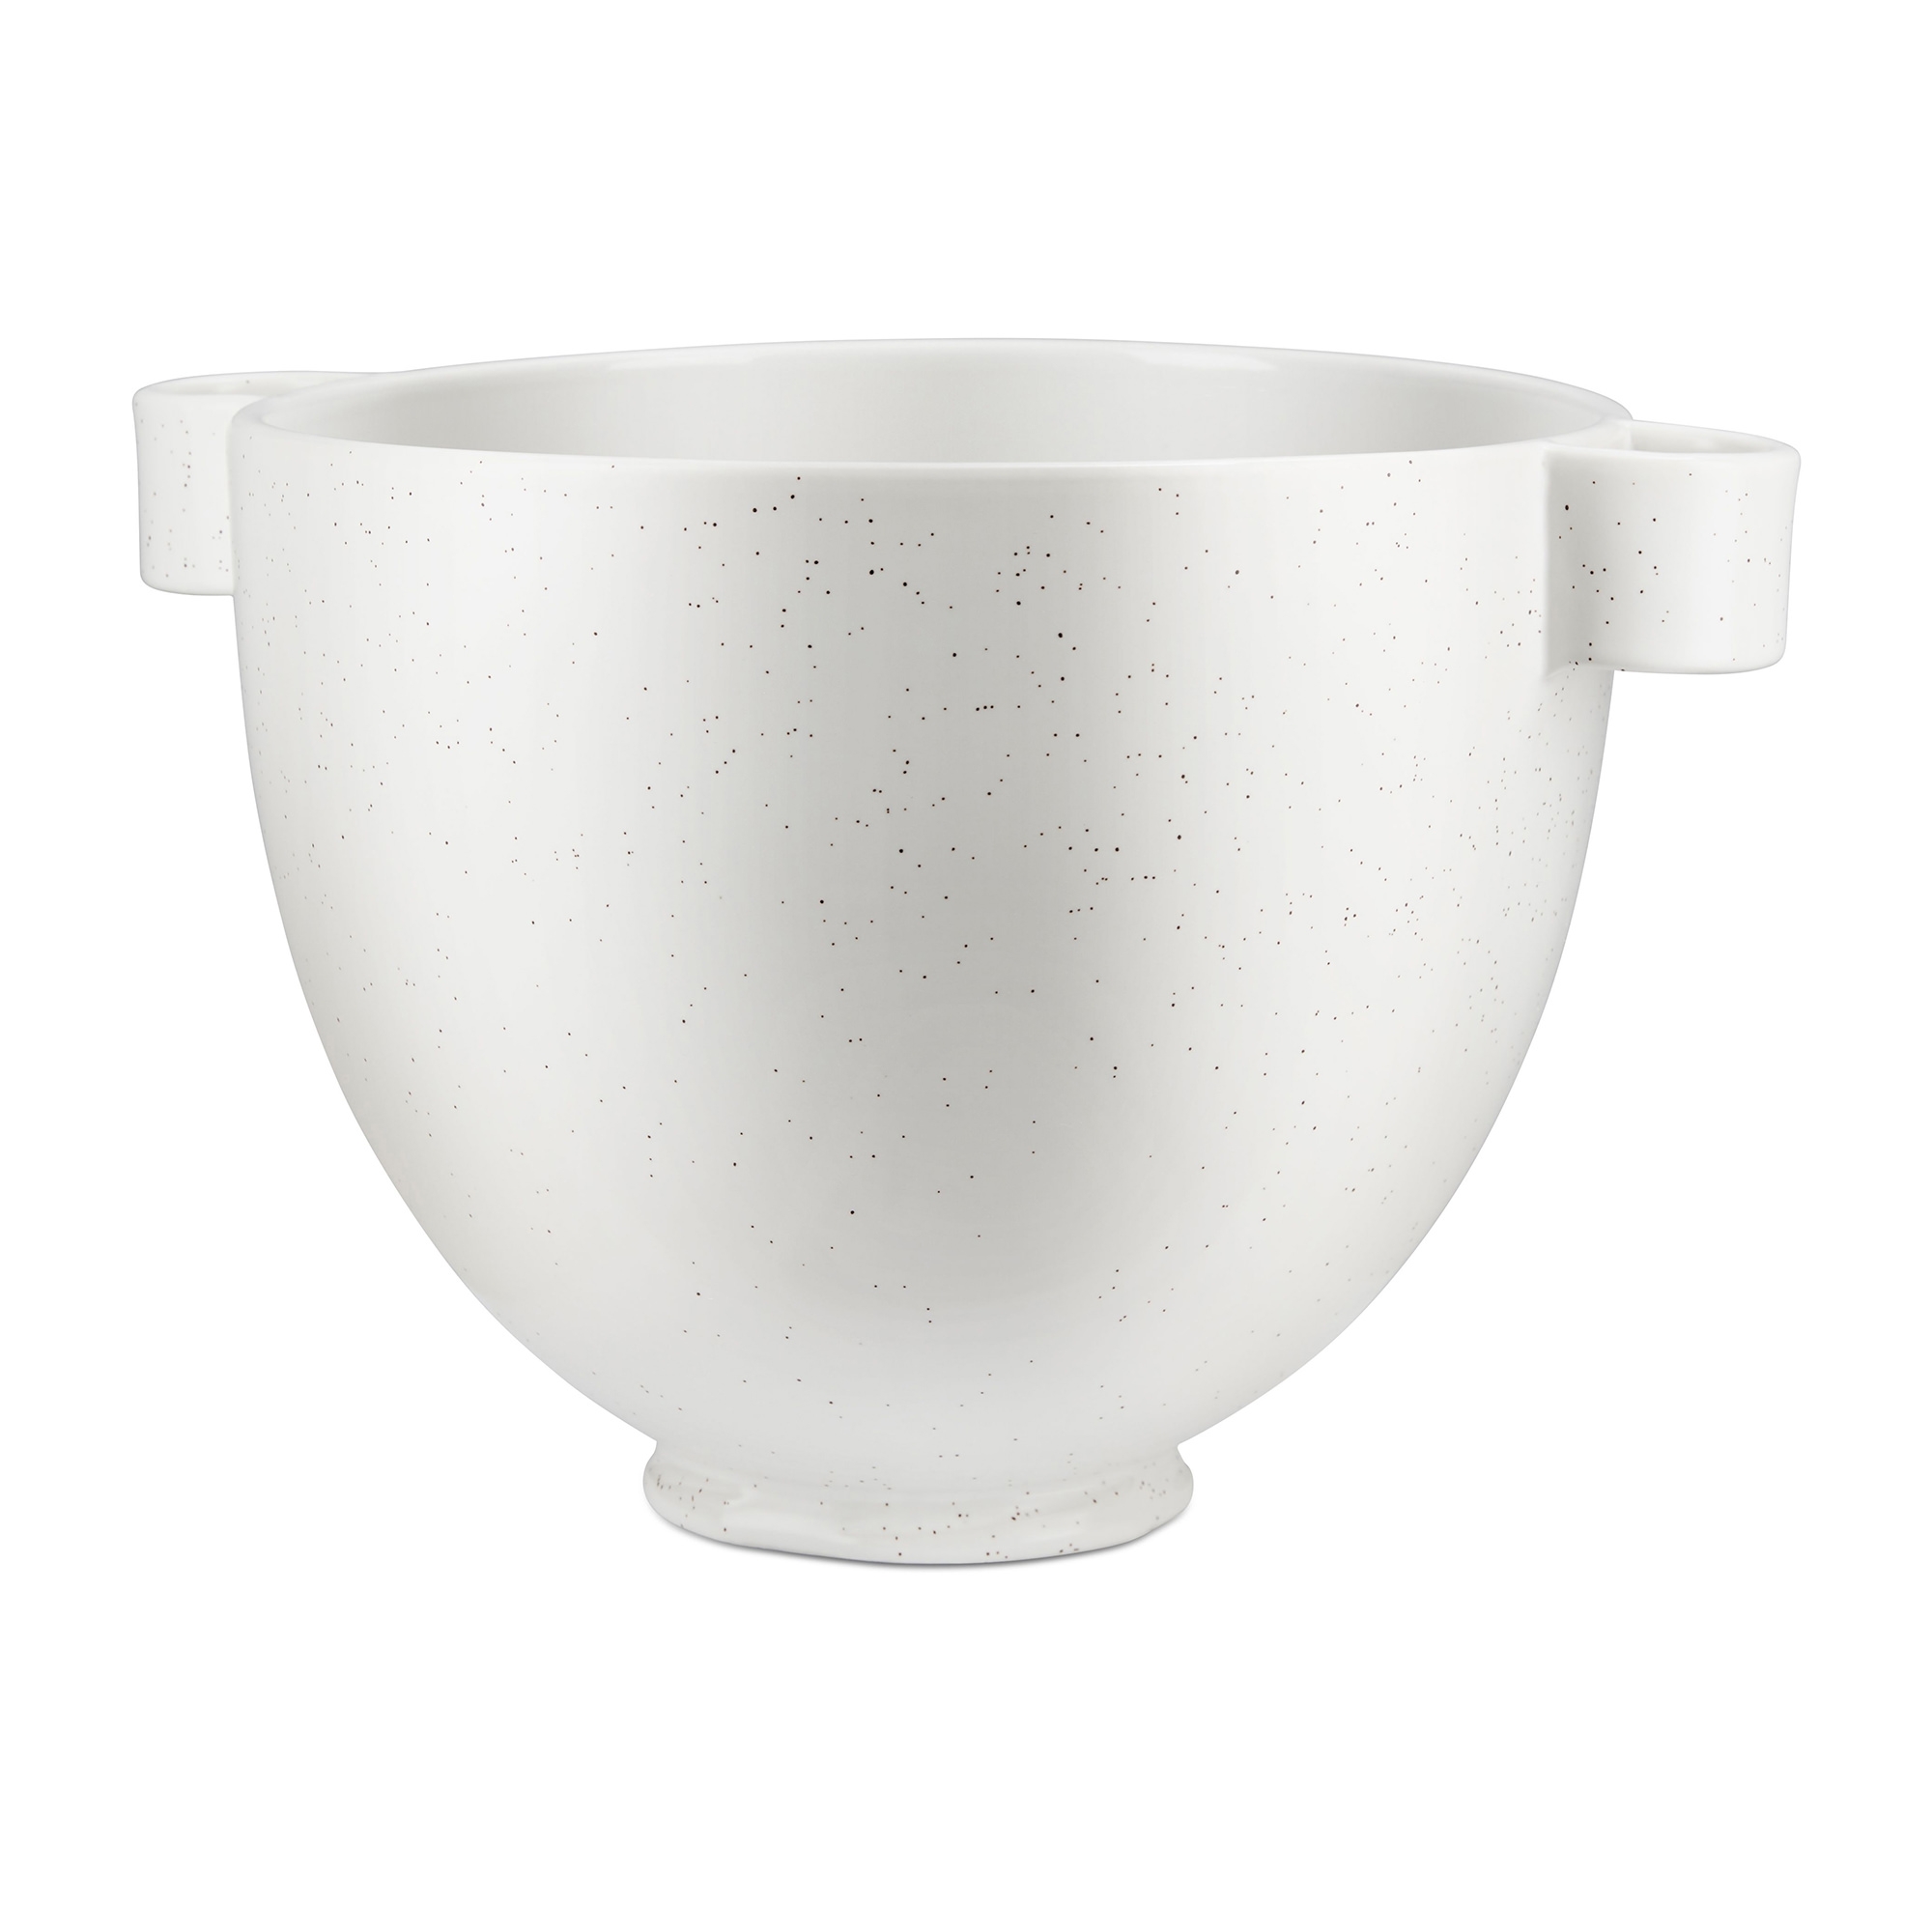 KitchenAid Ceramic Bowl for Stand Mixer 4.7L Speckled Stone Image 1